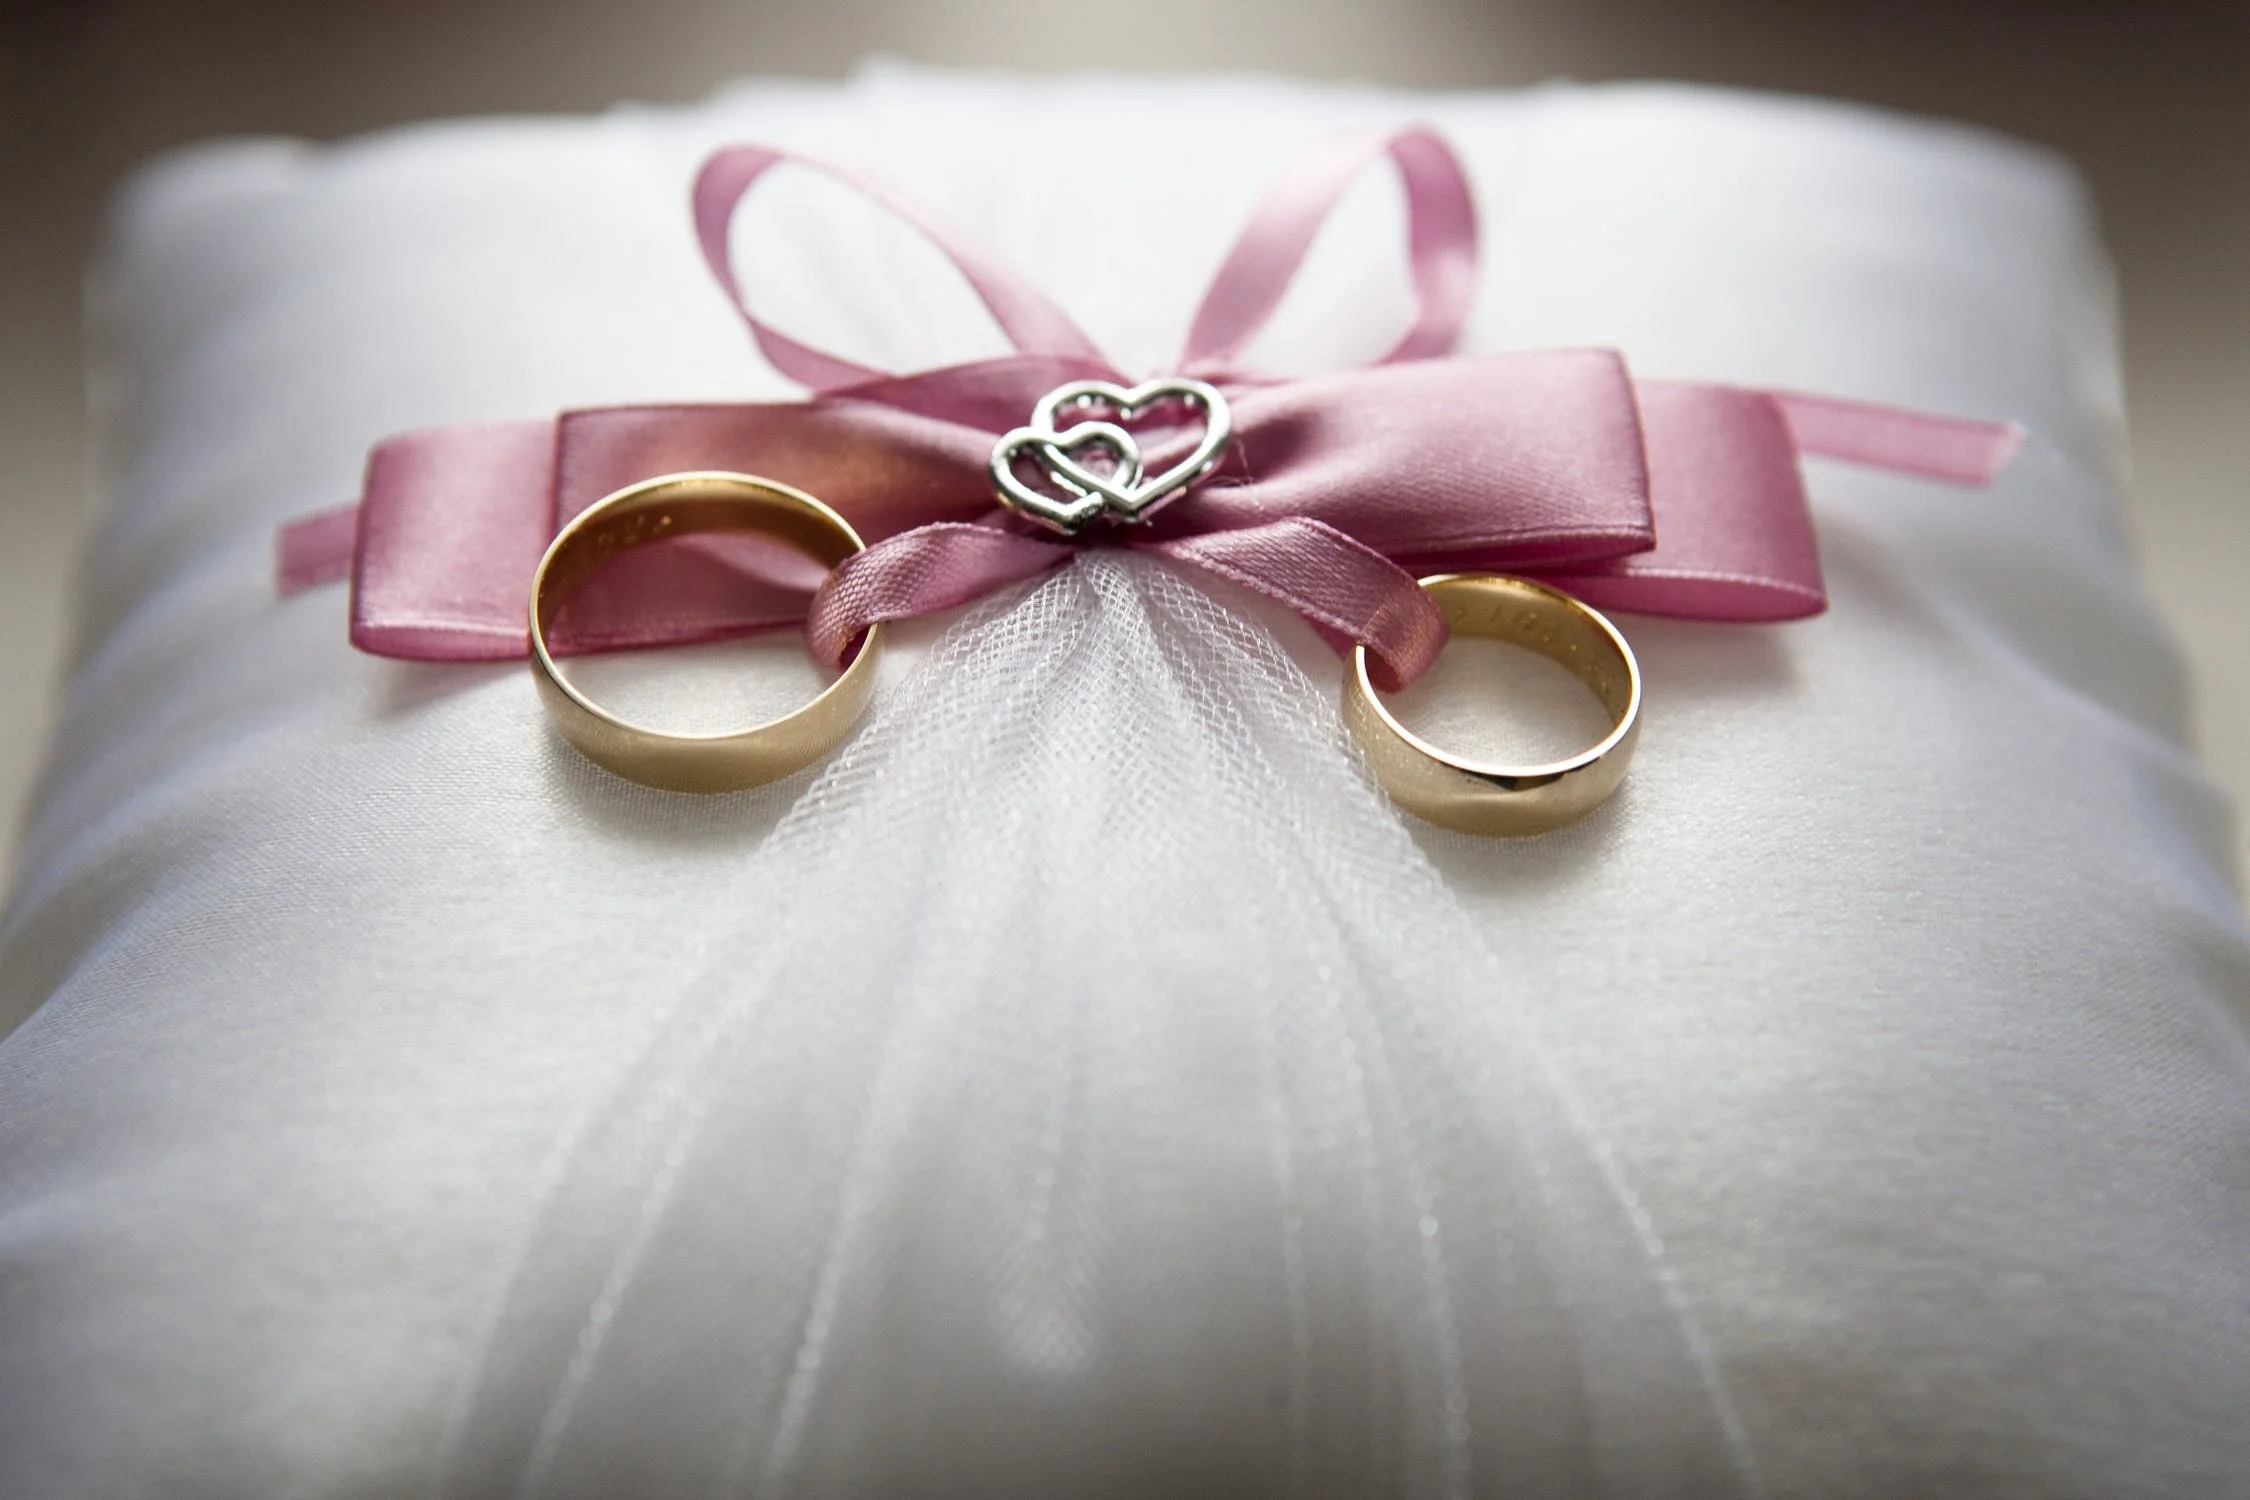 A pair of wedding rings placed on a pink bow. | Source: Pexels